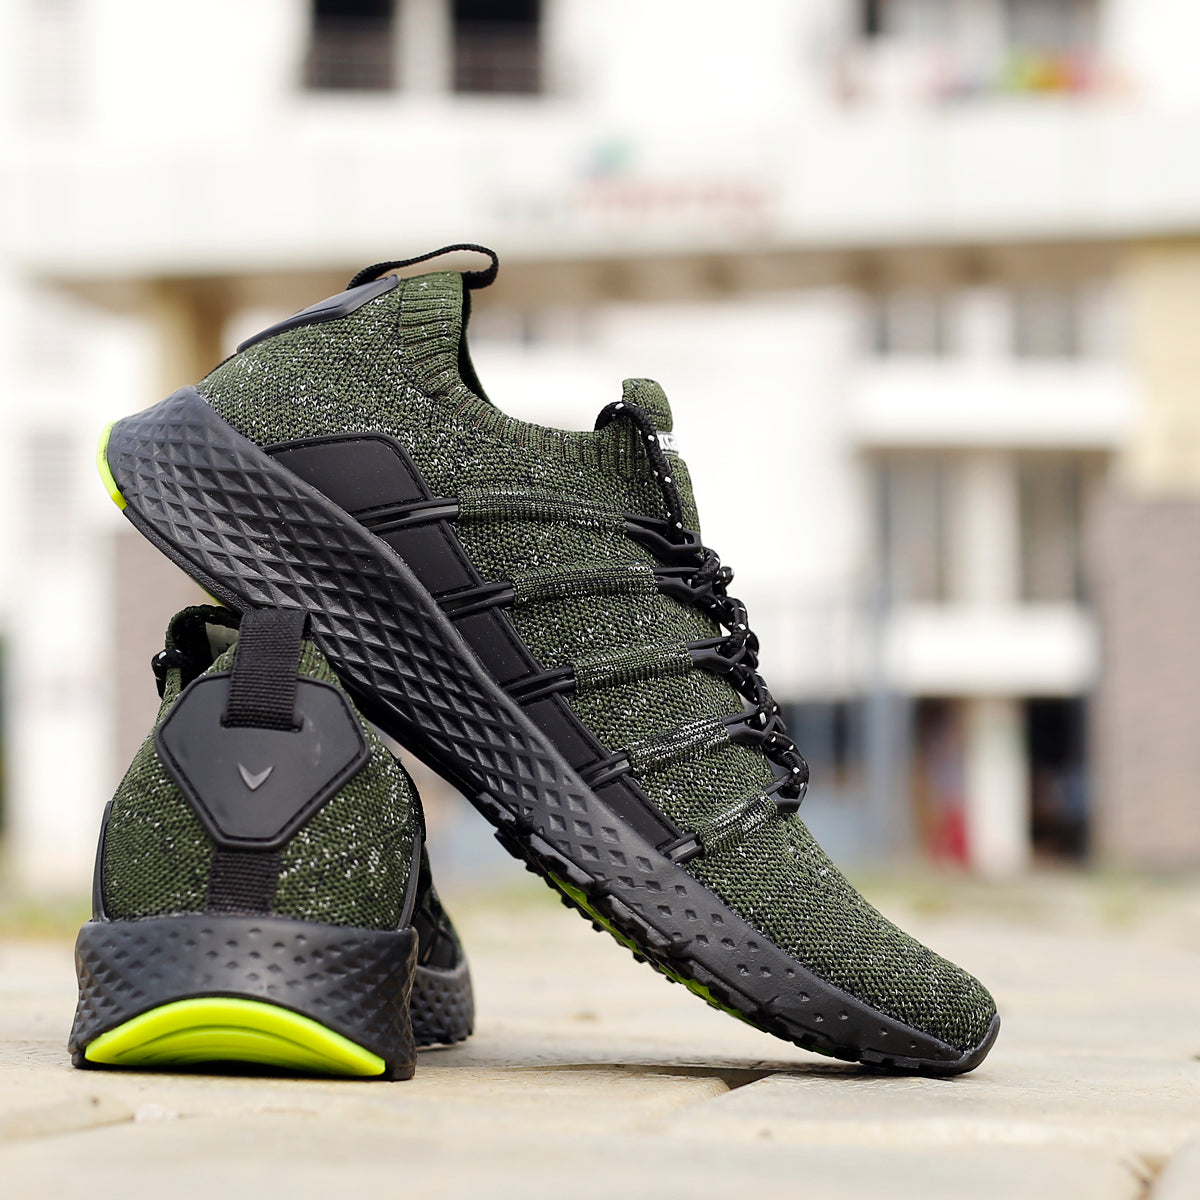 Bacca Bucci STELLA Running Shoes with Adaptive Smart Cushioning 5 in 1 Uni-Moulding Technology - Bacca Bucci